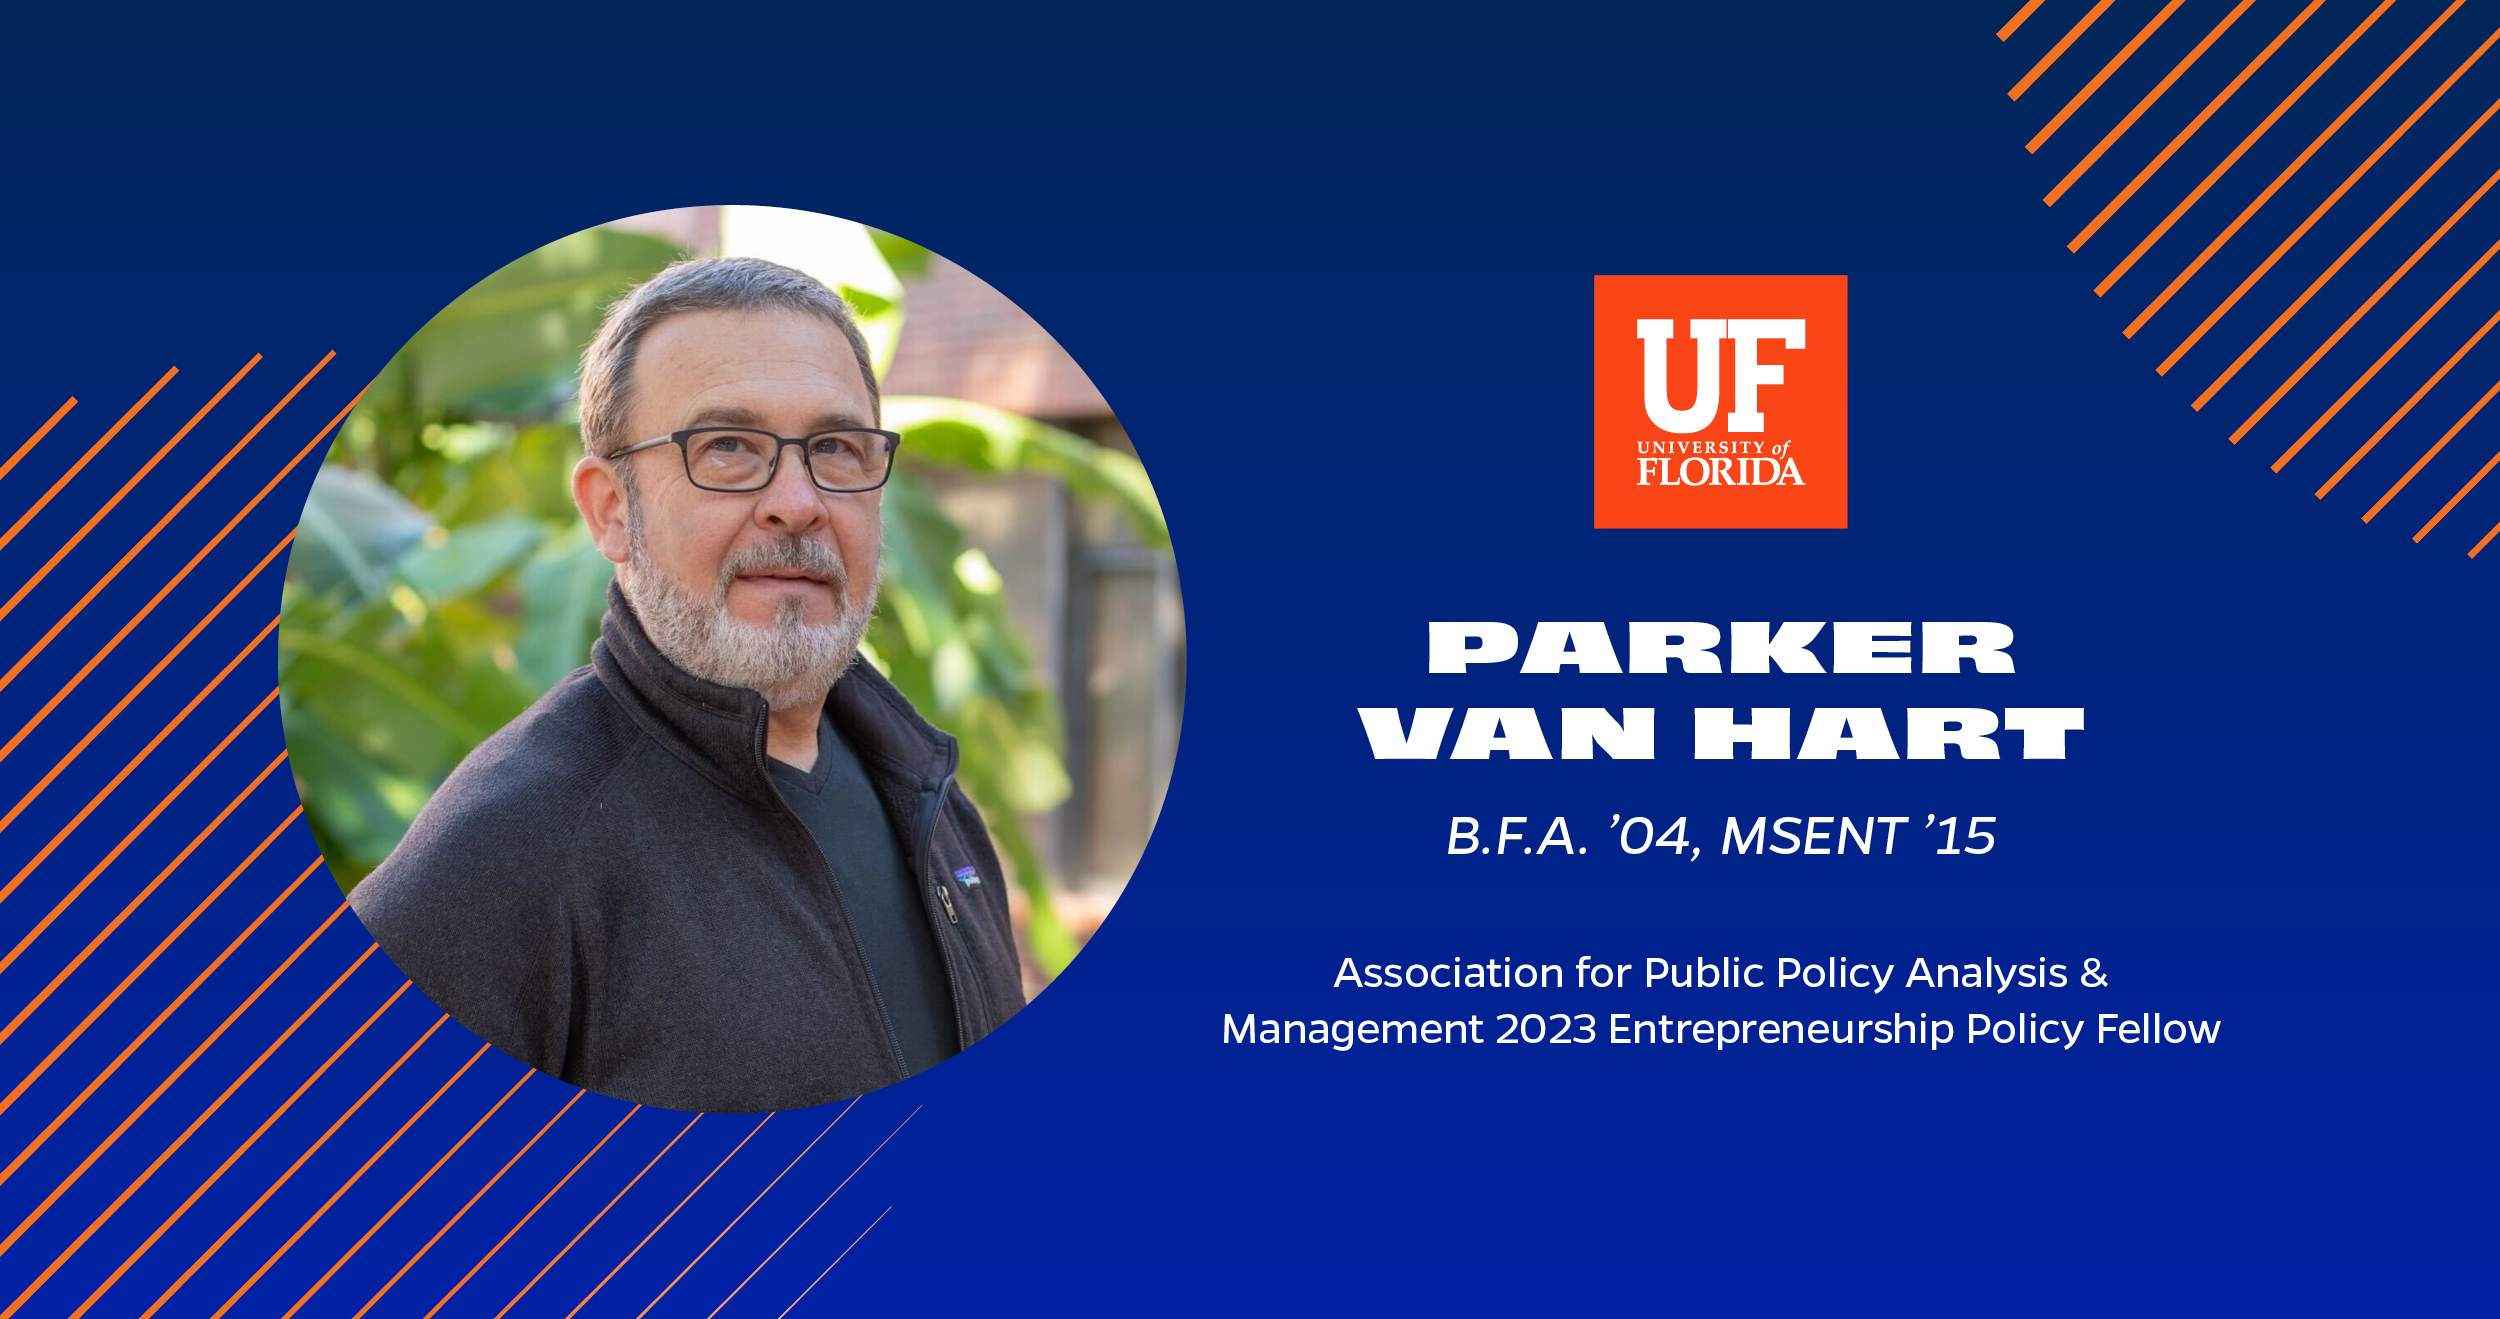 This is a graphic image of a person’s headshot with their name and credentials on a blue background with orange accents in the UF momentum style. Their name is Parker Van Hart are the Entrepreneurship Policy Fellow for the Association for Public Policy Analysis & Management in 2023. Van Hart has a Bachelor of Fine Arts degree from 2004 and a Master of Science in Entrepreneurship degree from 2015, both from the University of Florida.